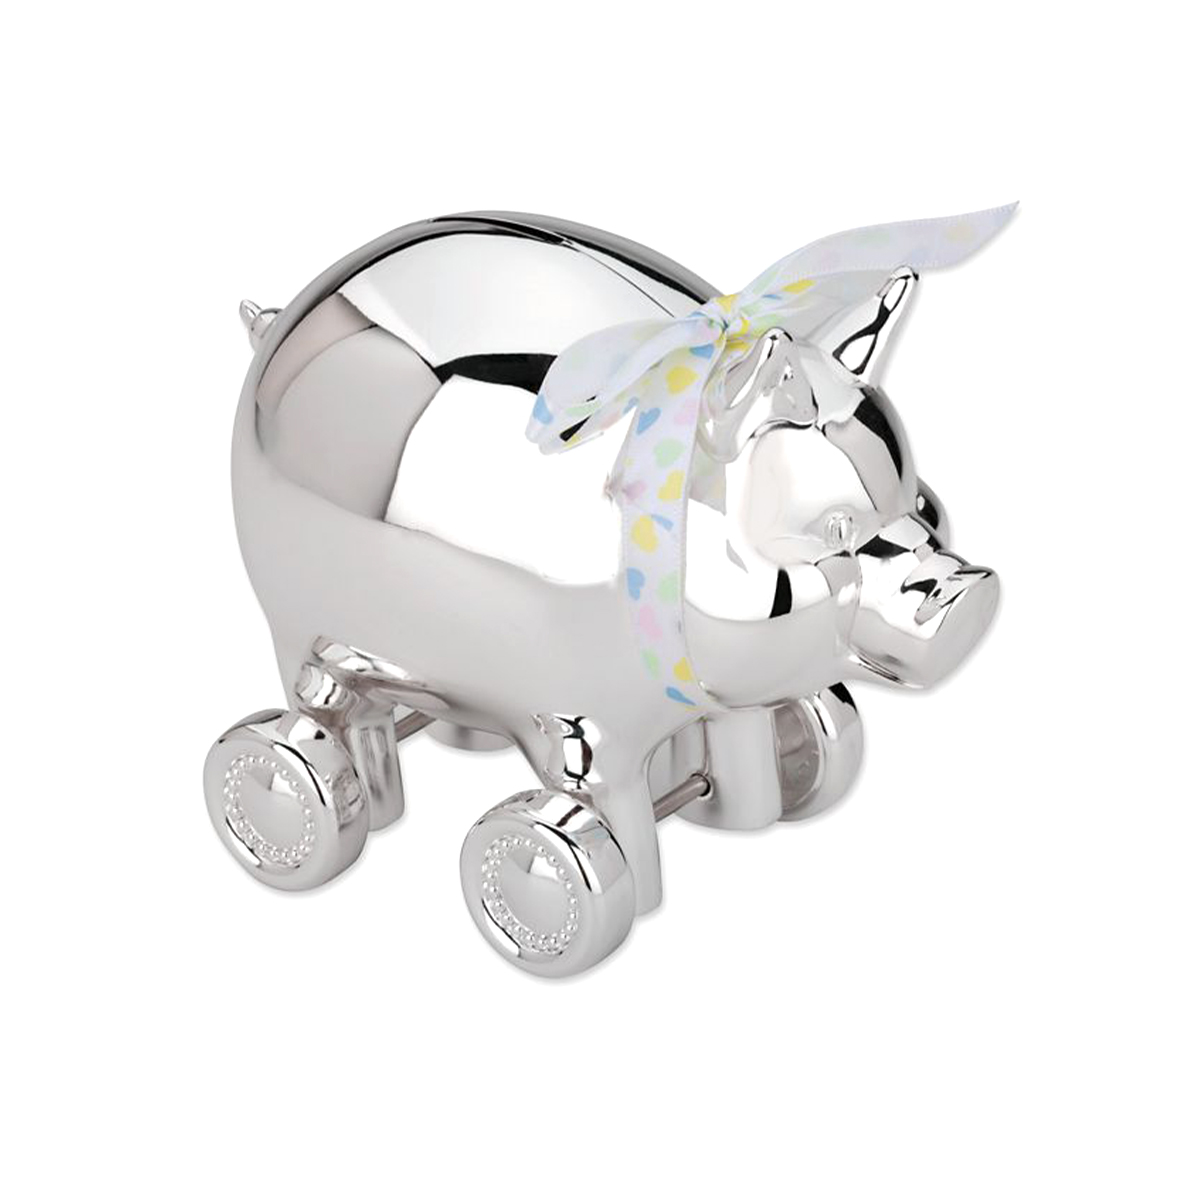 Reed & Barton - Piggy with Wheels Silverplate Bank